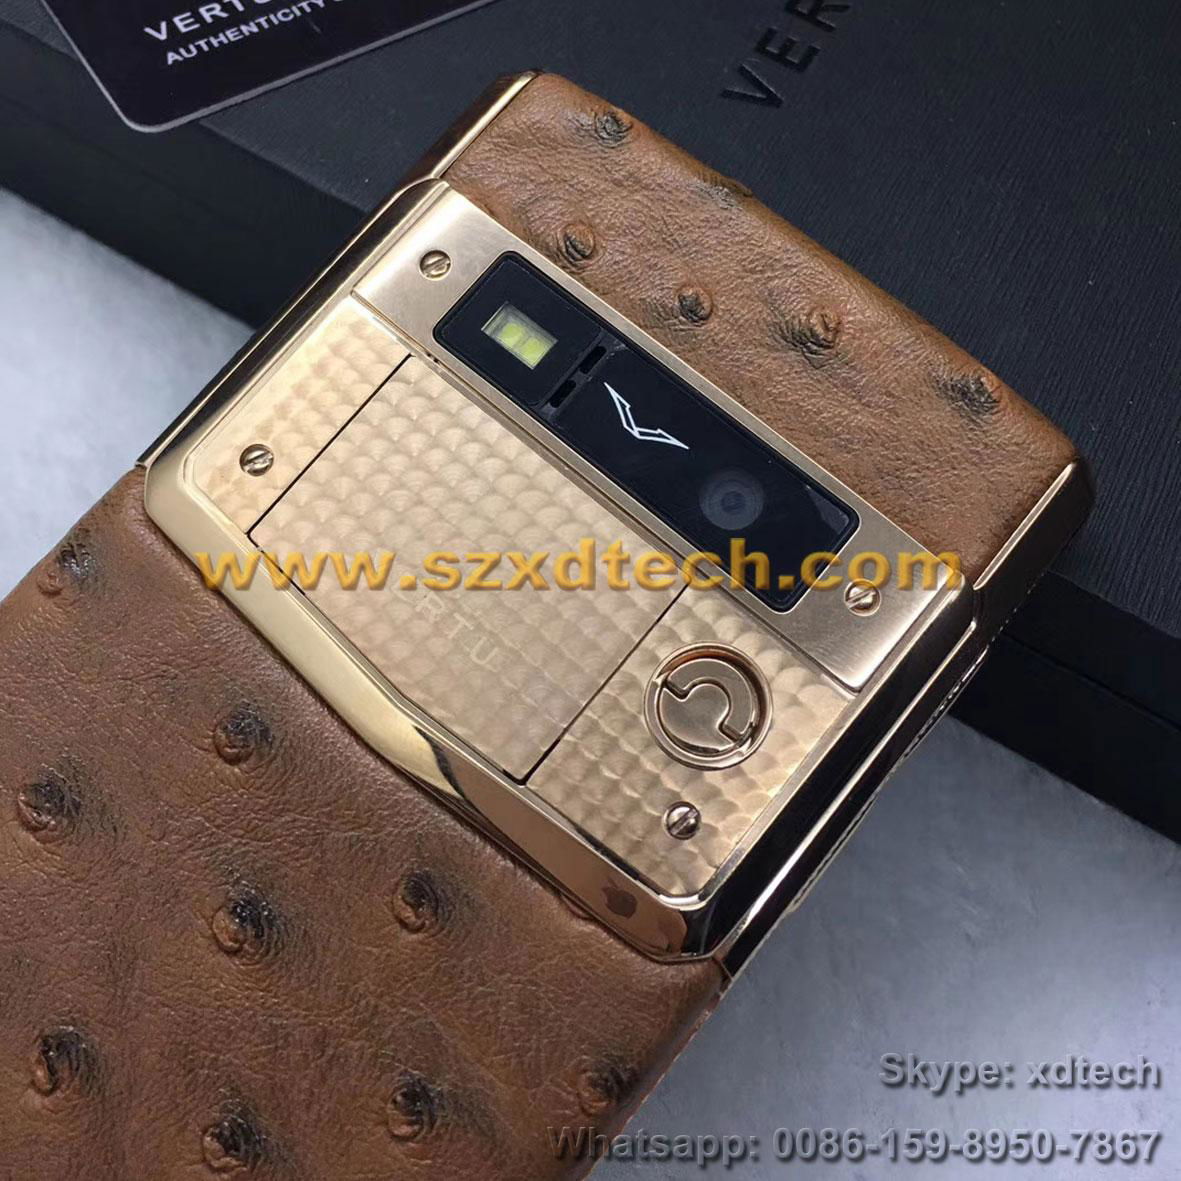 Copy Vertu Signature Touch, Bentley Sexy Ostrich Leather Octacore 4